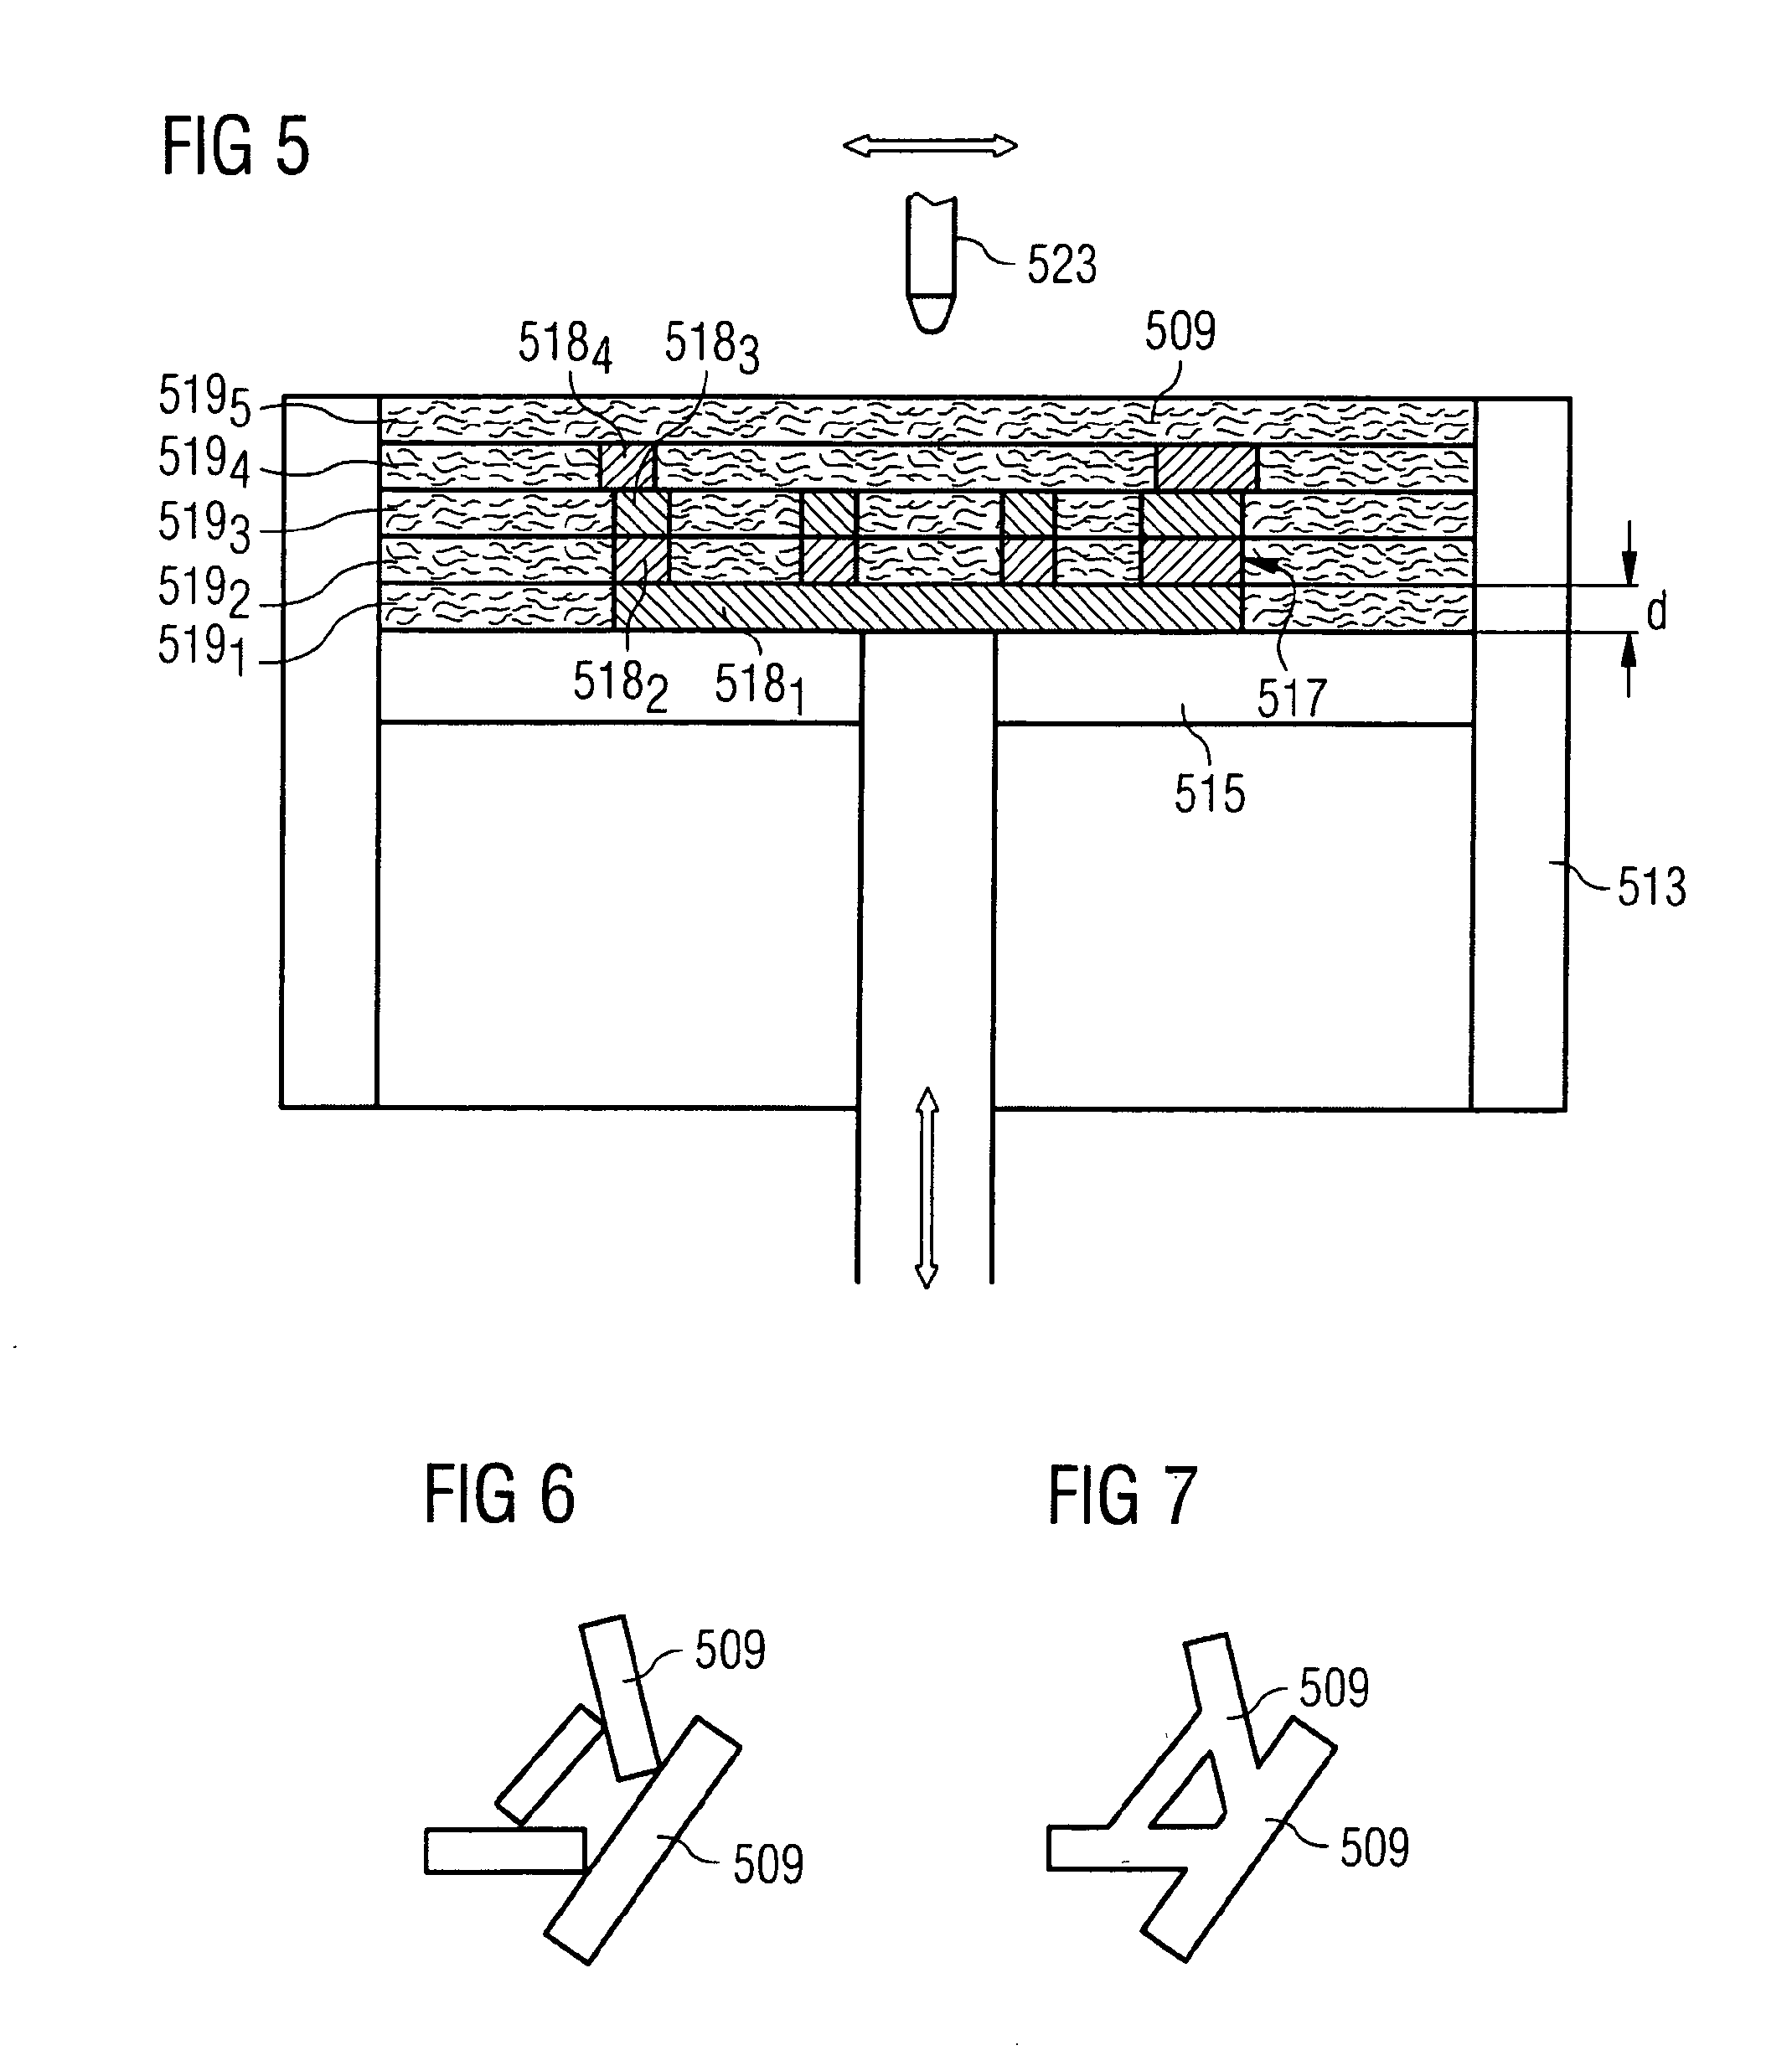 Fibers and methods for use in solid freeform fabrication